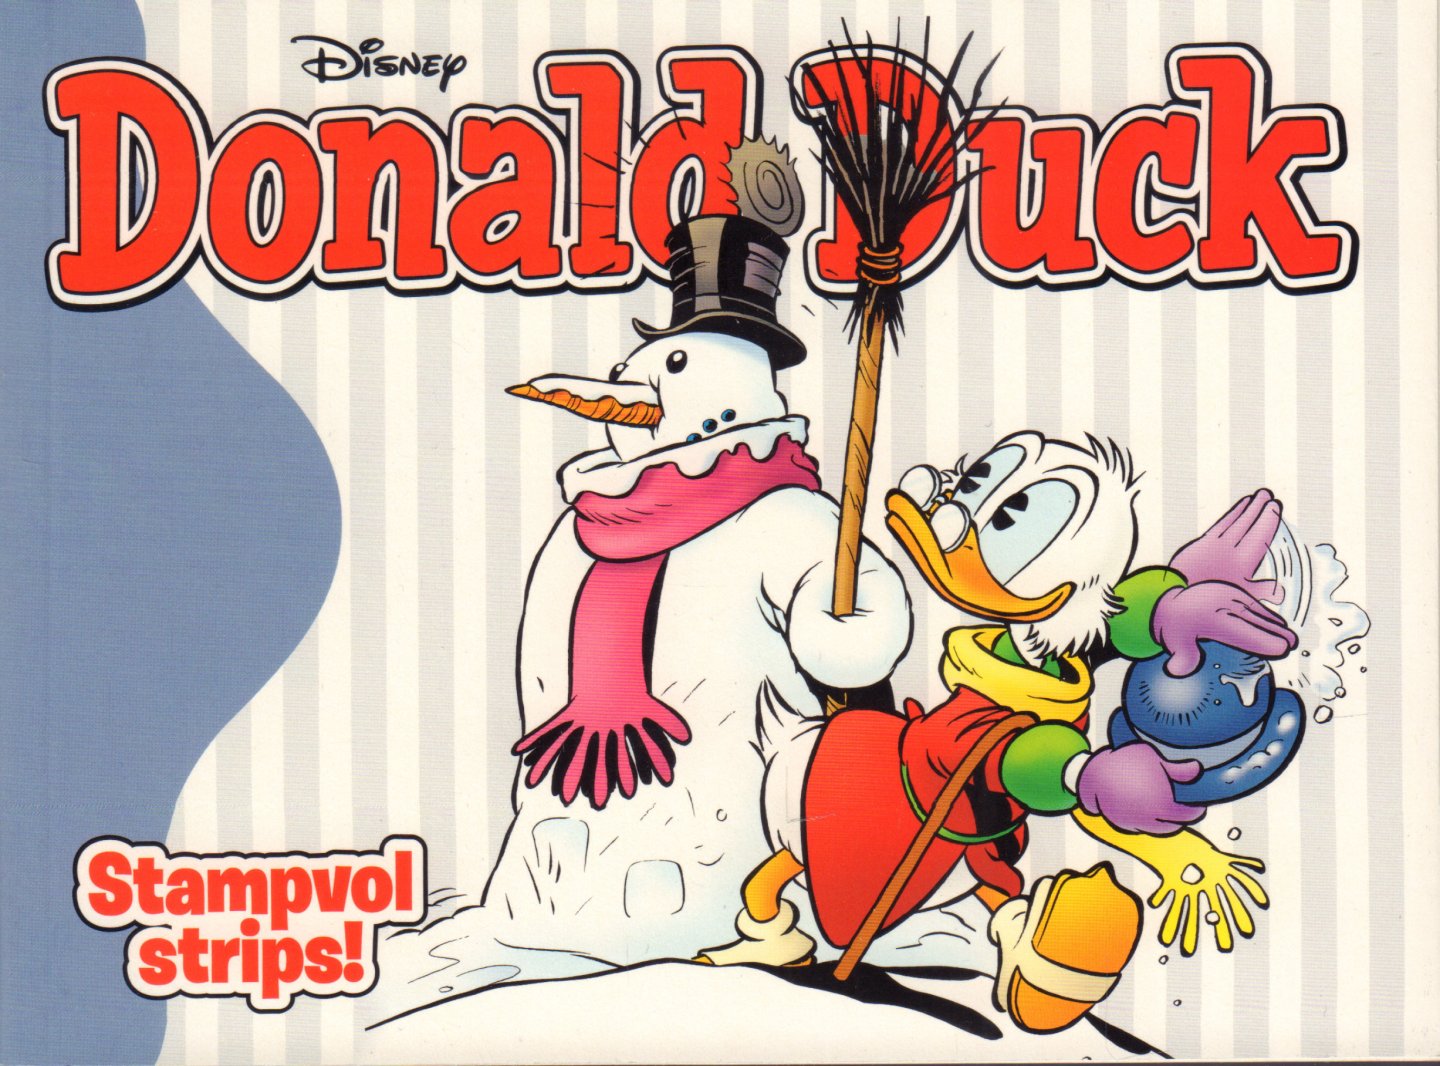 Walt Disney - Donald Duck - Stampvol Strips !, 95 pag. softcover, oblong formaat, gave staat